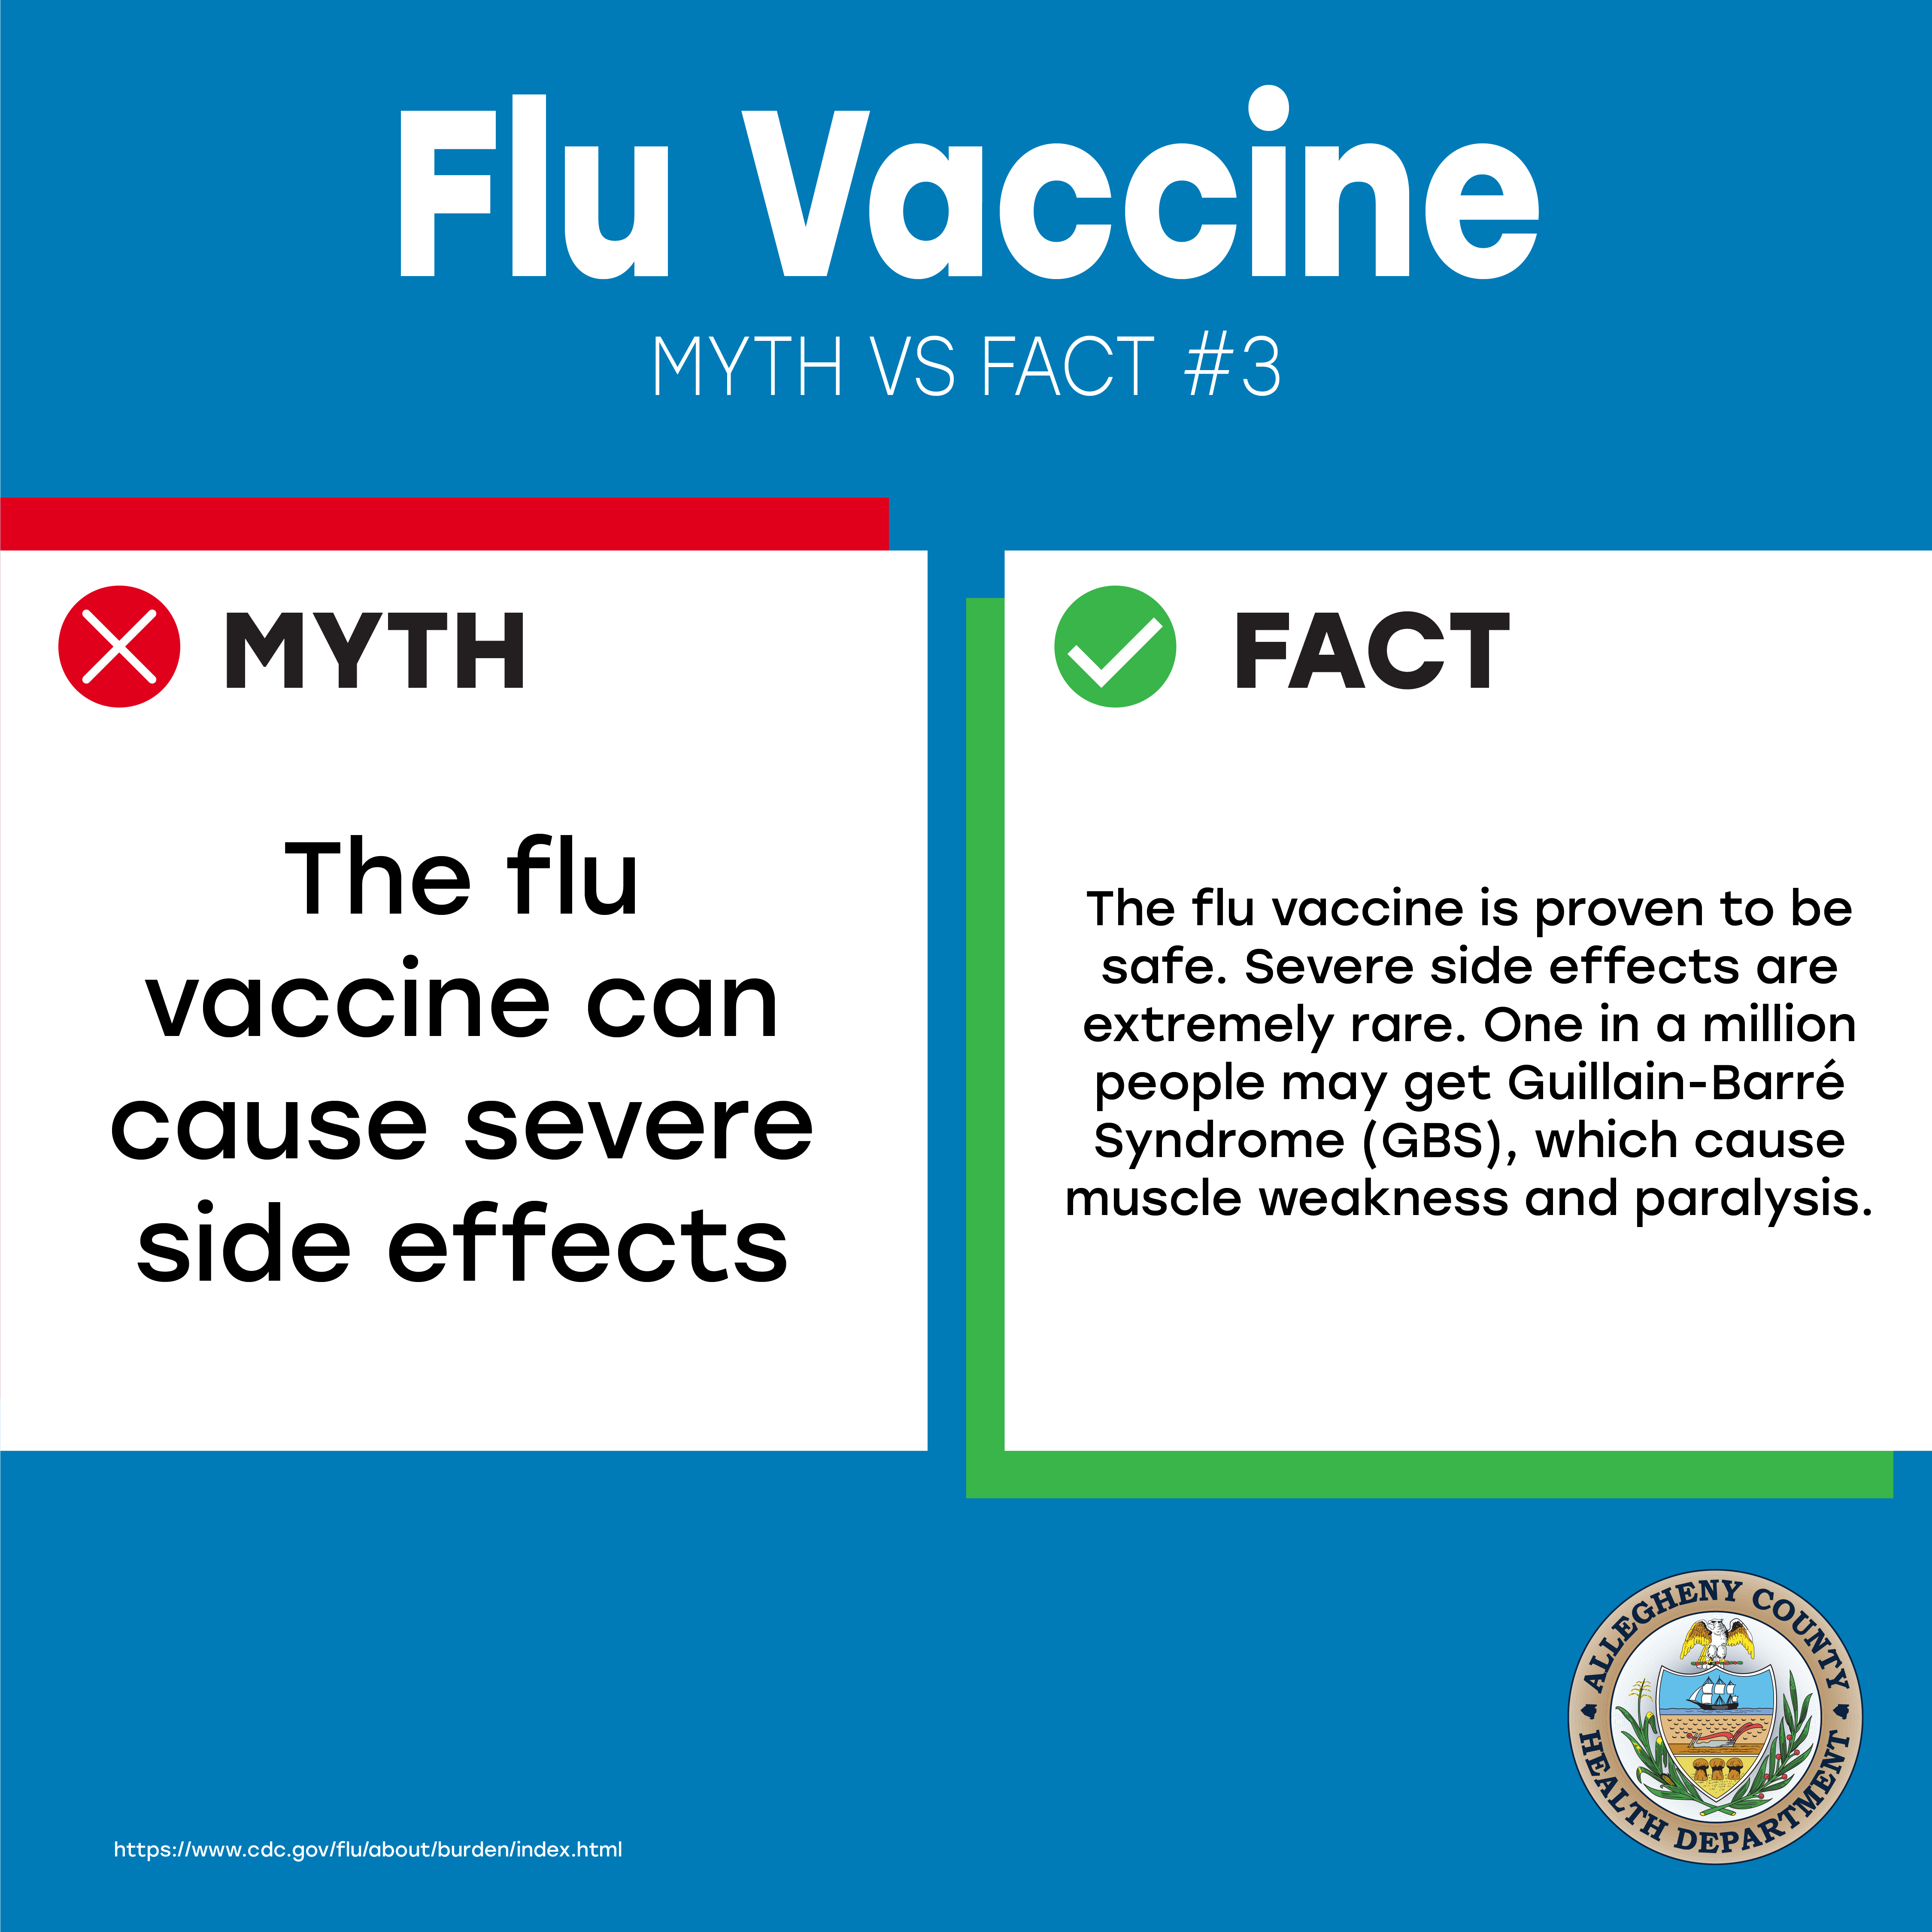 Thumbnail image of Myth the flu vaccine causes severe side effects vs. the Fact that side effects from the flu vaccine are extremely rare. The logo of the Allegheny County health Department is on the bottom right and the bottom left has a link to CDC's flu information.